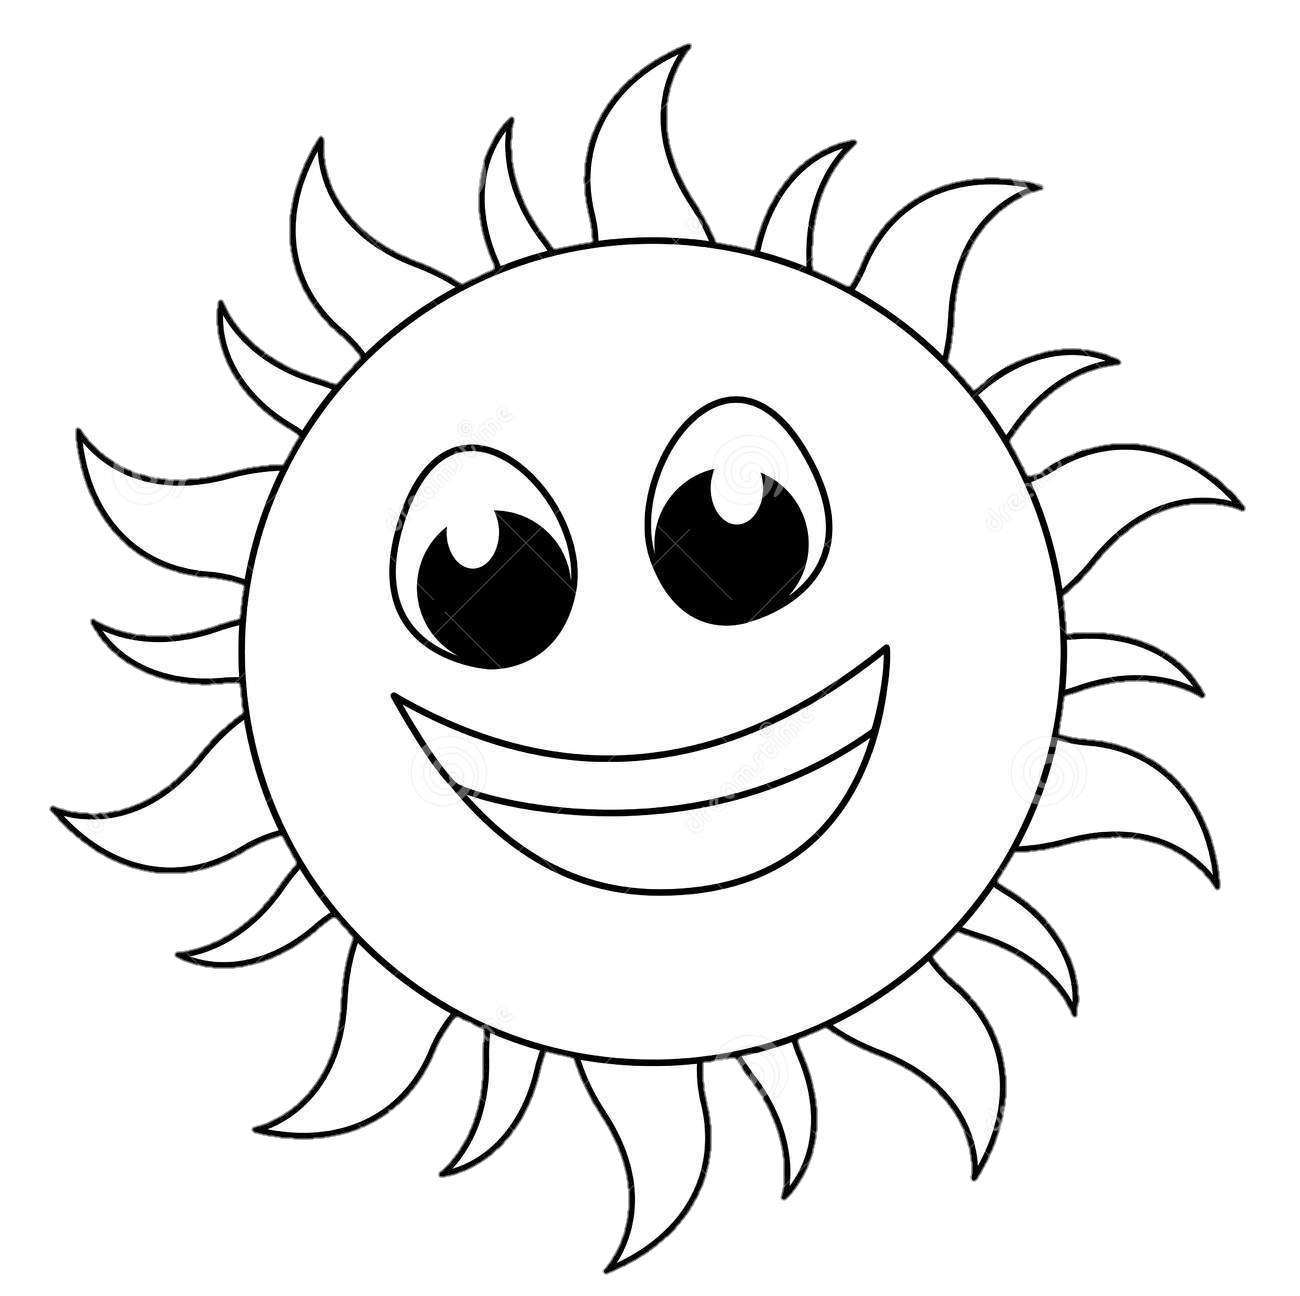 sun-png-from-pngfre-6